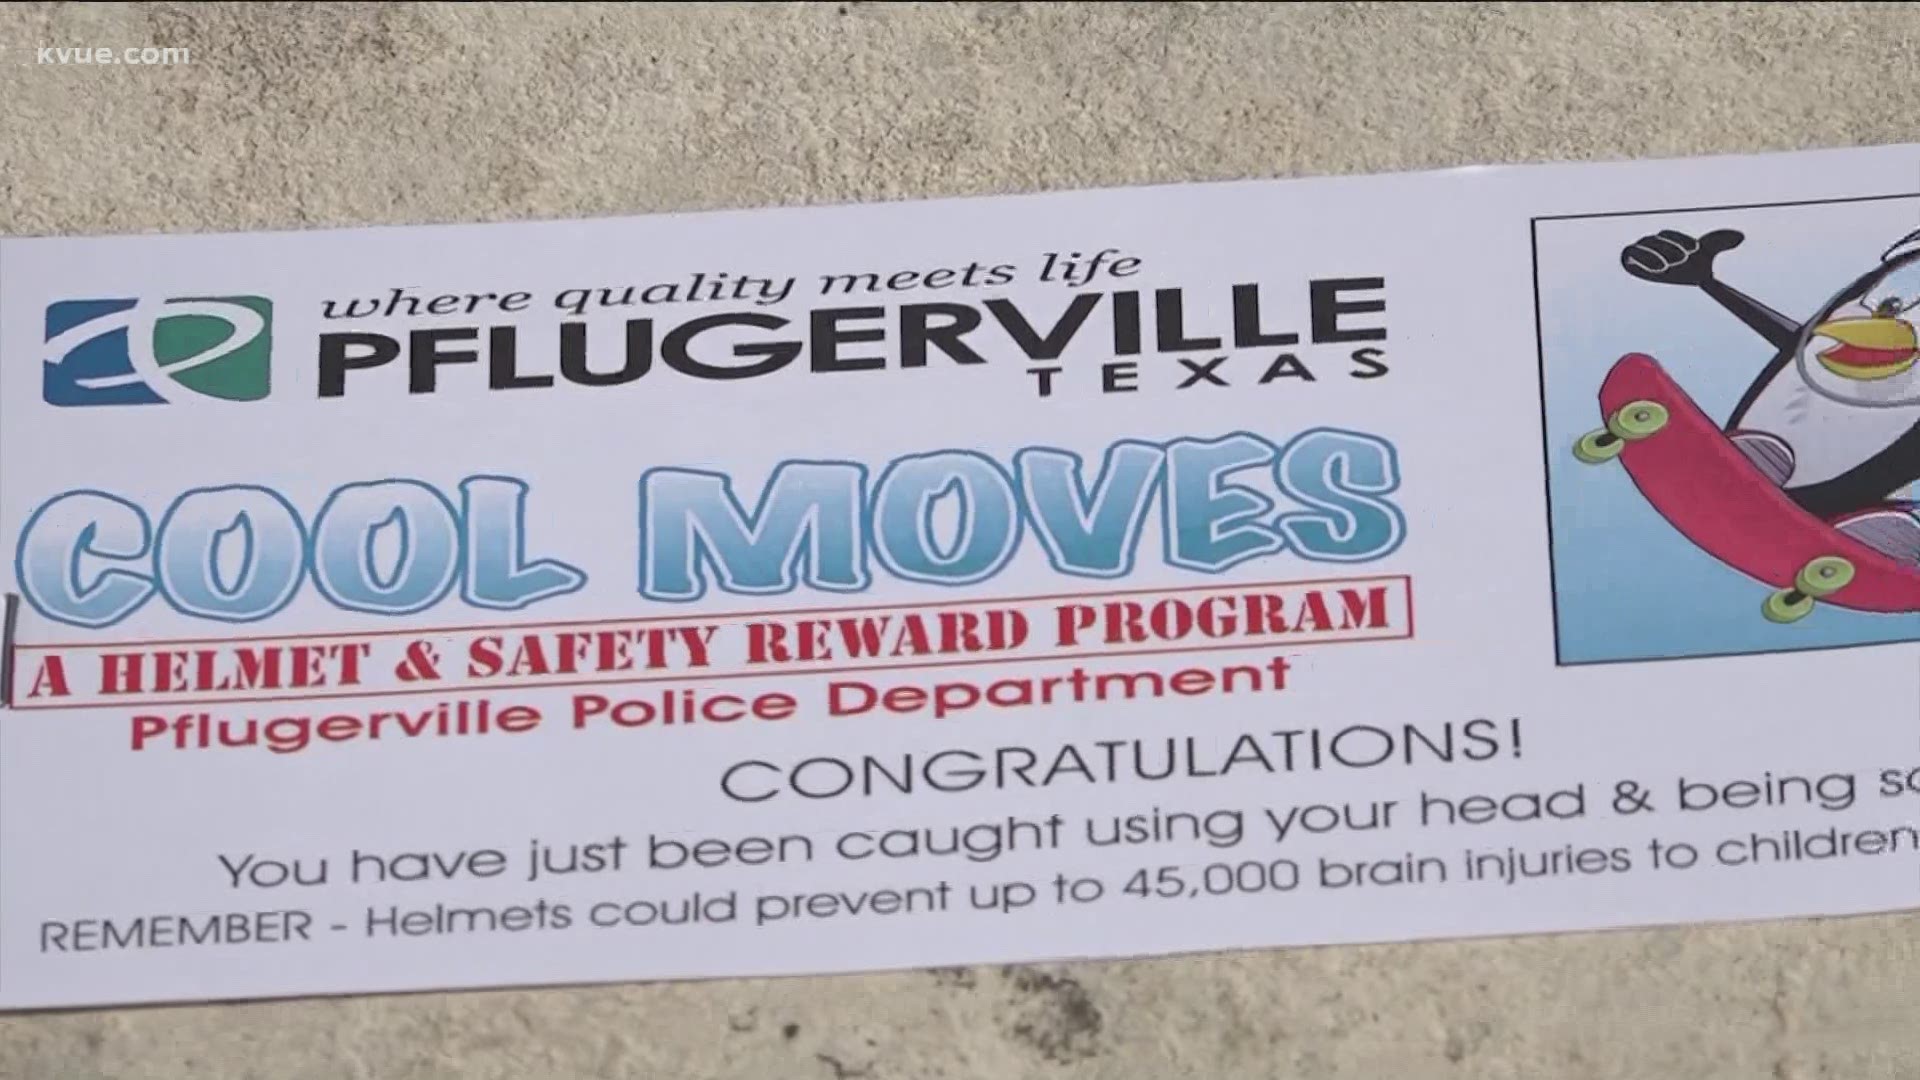 The Pflugerville Police Department is on the lookout for kids practicing safe habits in the community.